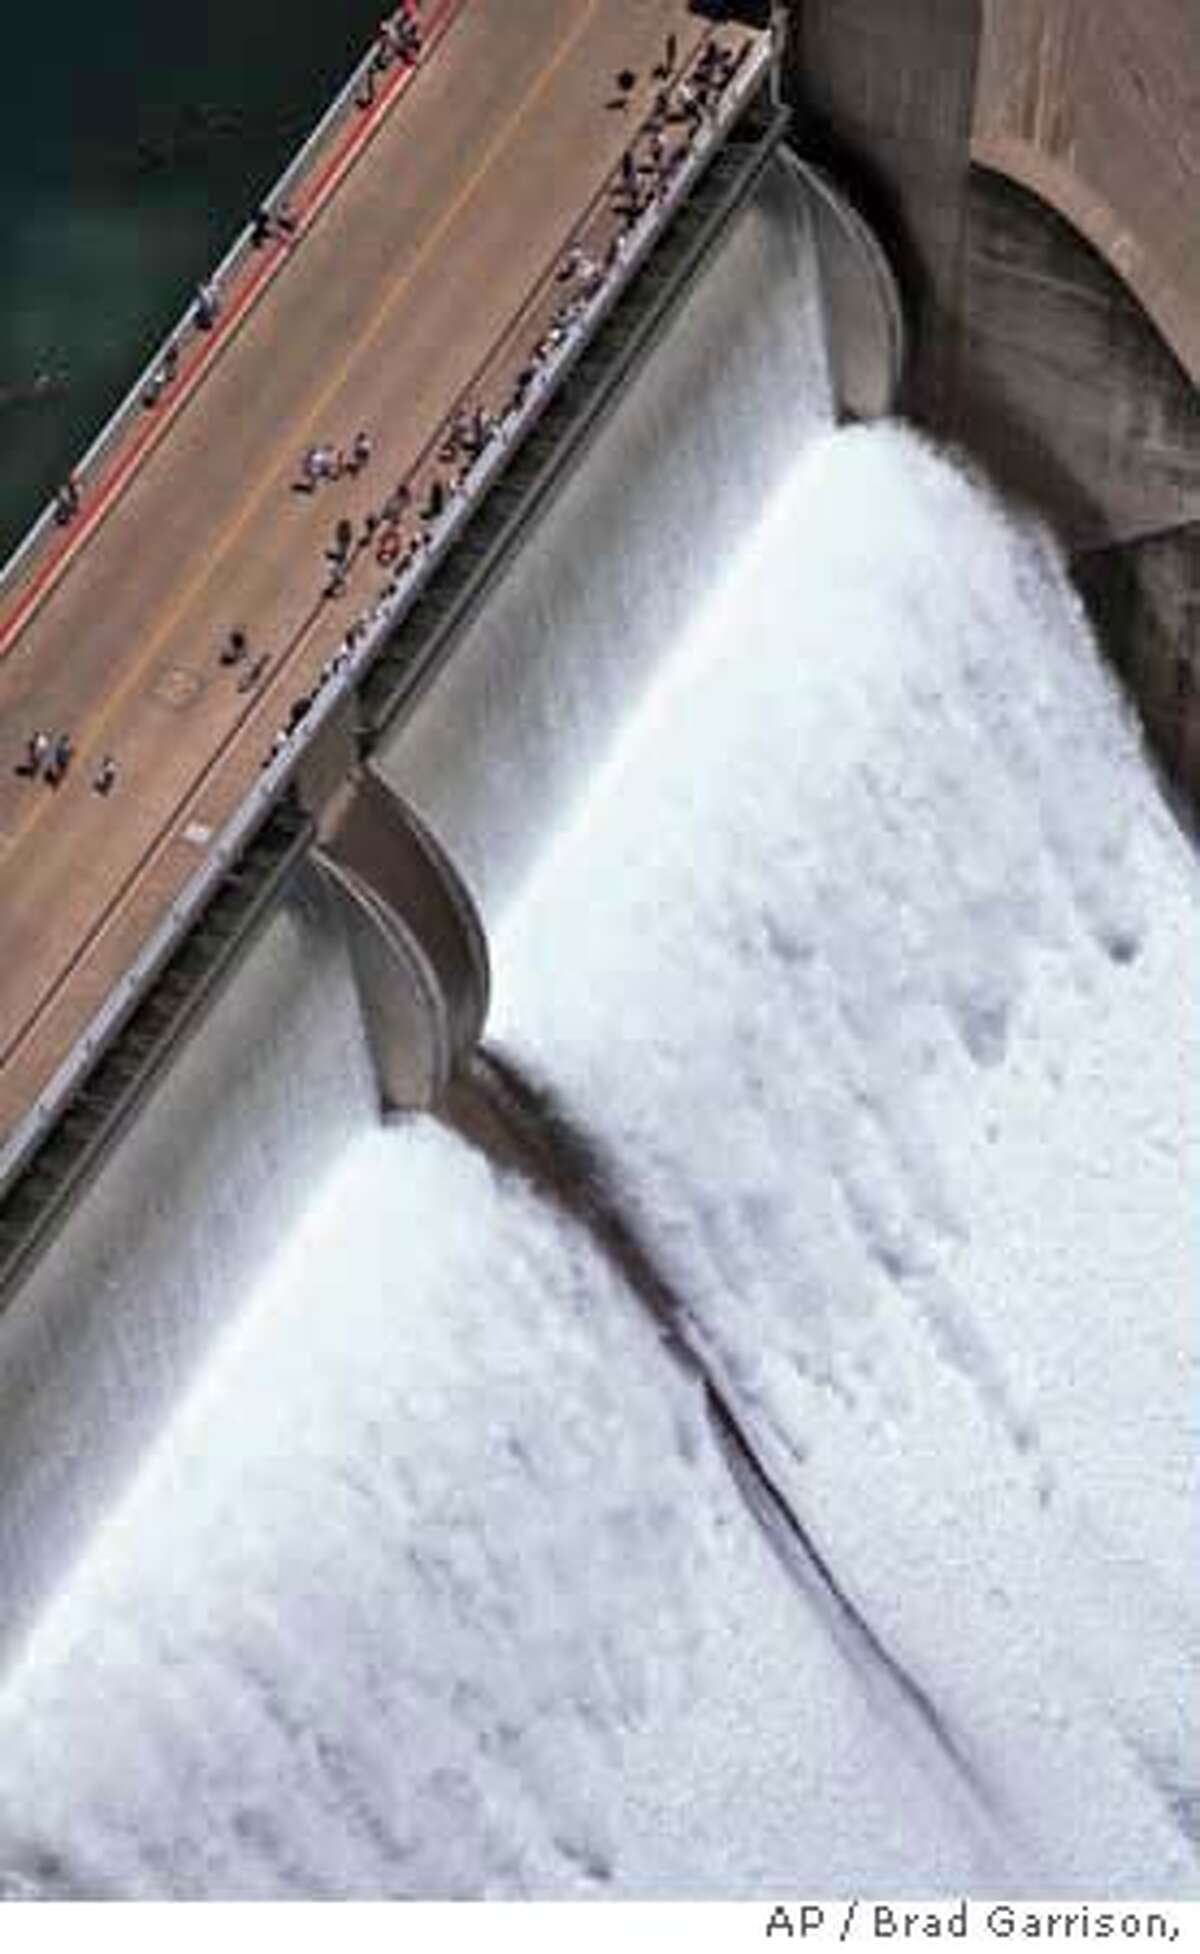 Thousands of people turned out in Lake Shasta, Calif., Thursday, June 18, 1998 to watch a man-made waterfall cascade over the lip of the Shasta Dam. About 1,200 cubic feet of water per second were allowed to slide over the top of the dam, a bare trickle at some waterfalls, but a roaring torrent when pouring over the entire length of the dam and crashing onto the spillway 500 feet below. The last time all three flashboard were opened was fifteen years ago. (AP Photo/Redding Record Searchlight, Brad Garrison) Ran on: 01-28-2007 Thousands turned out to watch a man-made waterfall at Shasta Dam as about 1,200 cubic feet of water per second were allowed to slide over the dam when all three flashboards were opened in 1998.